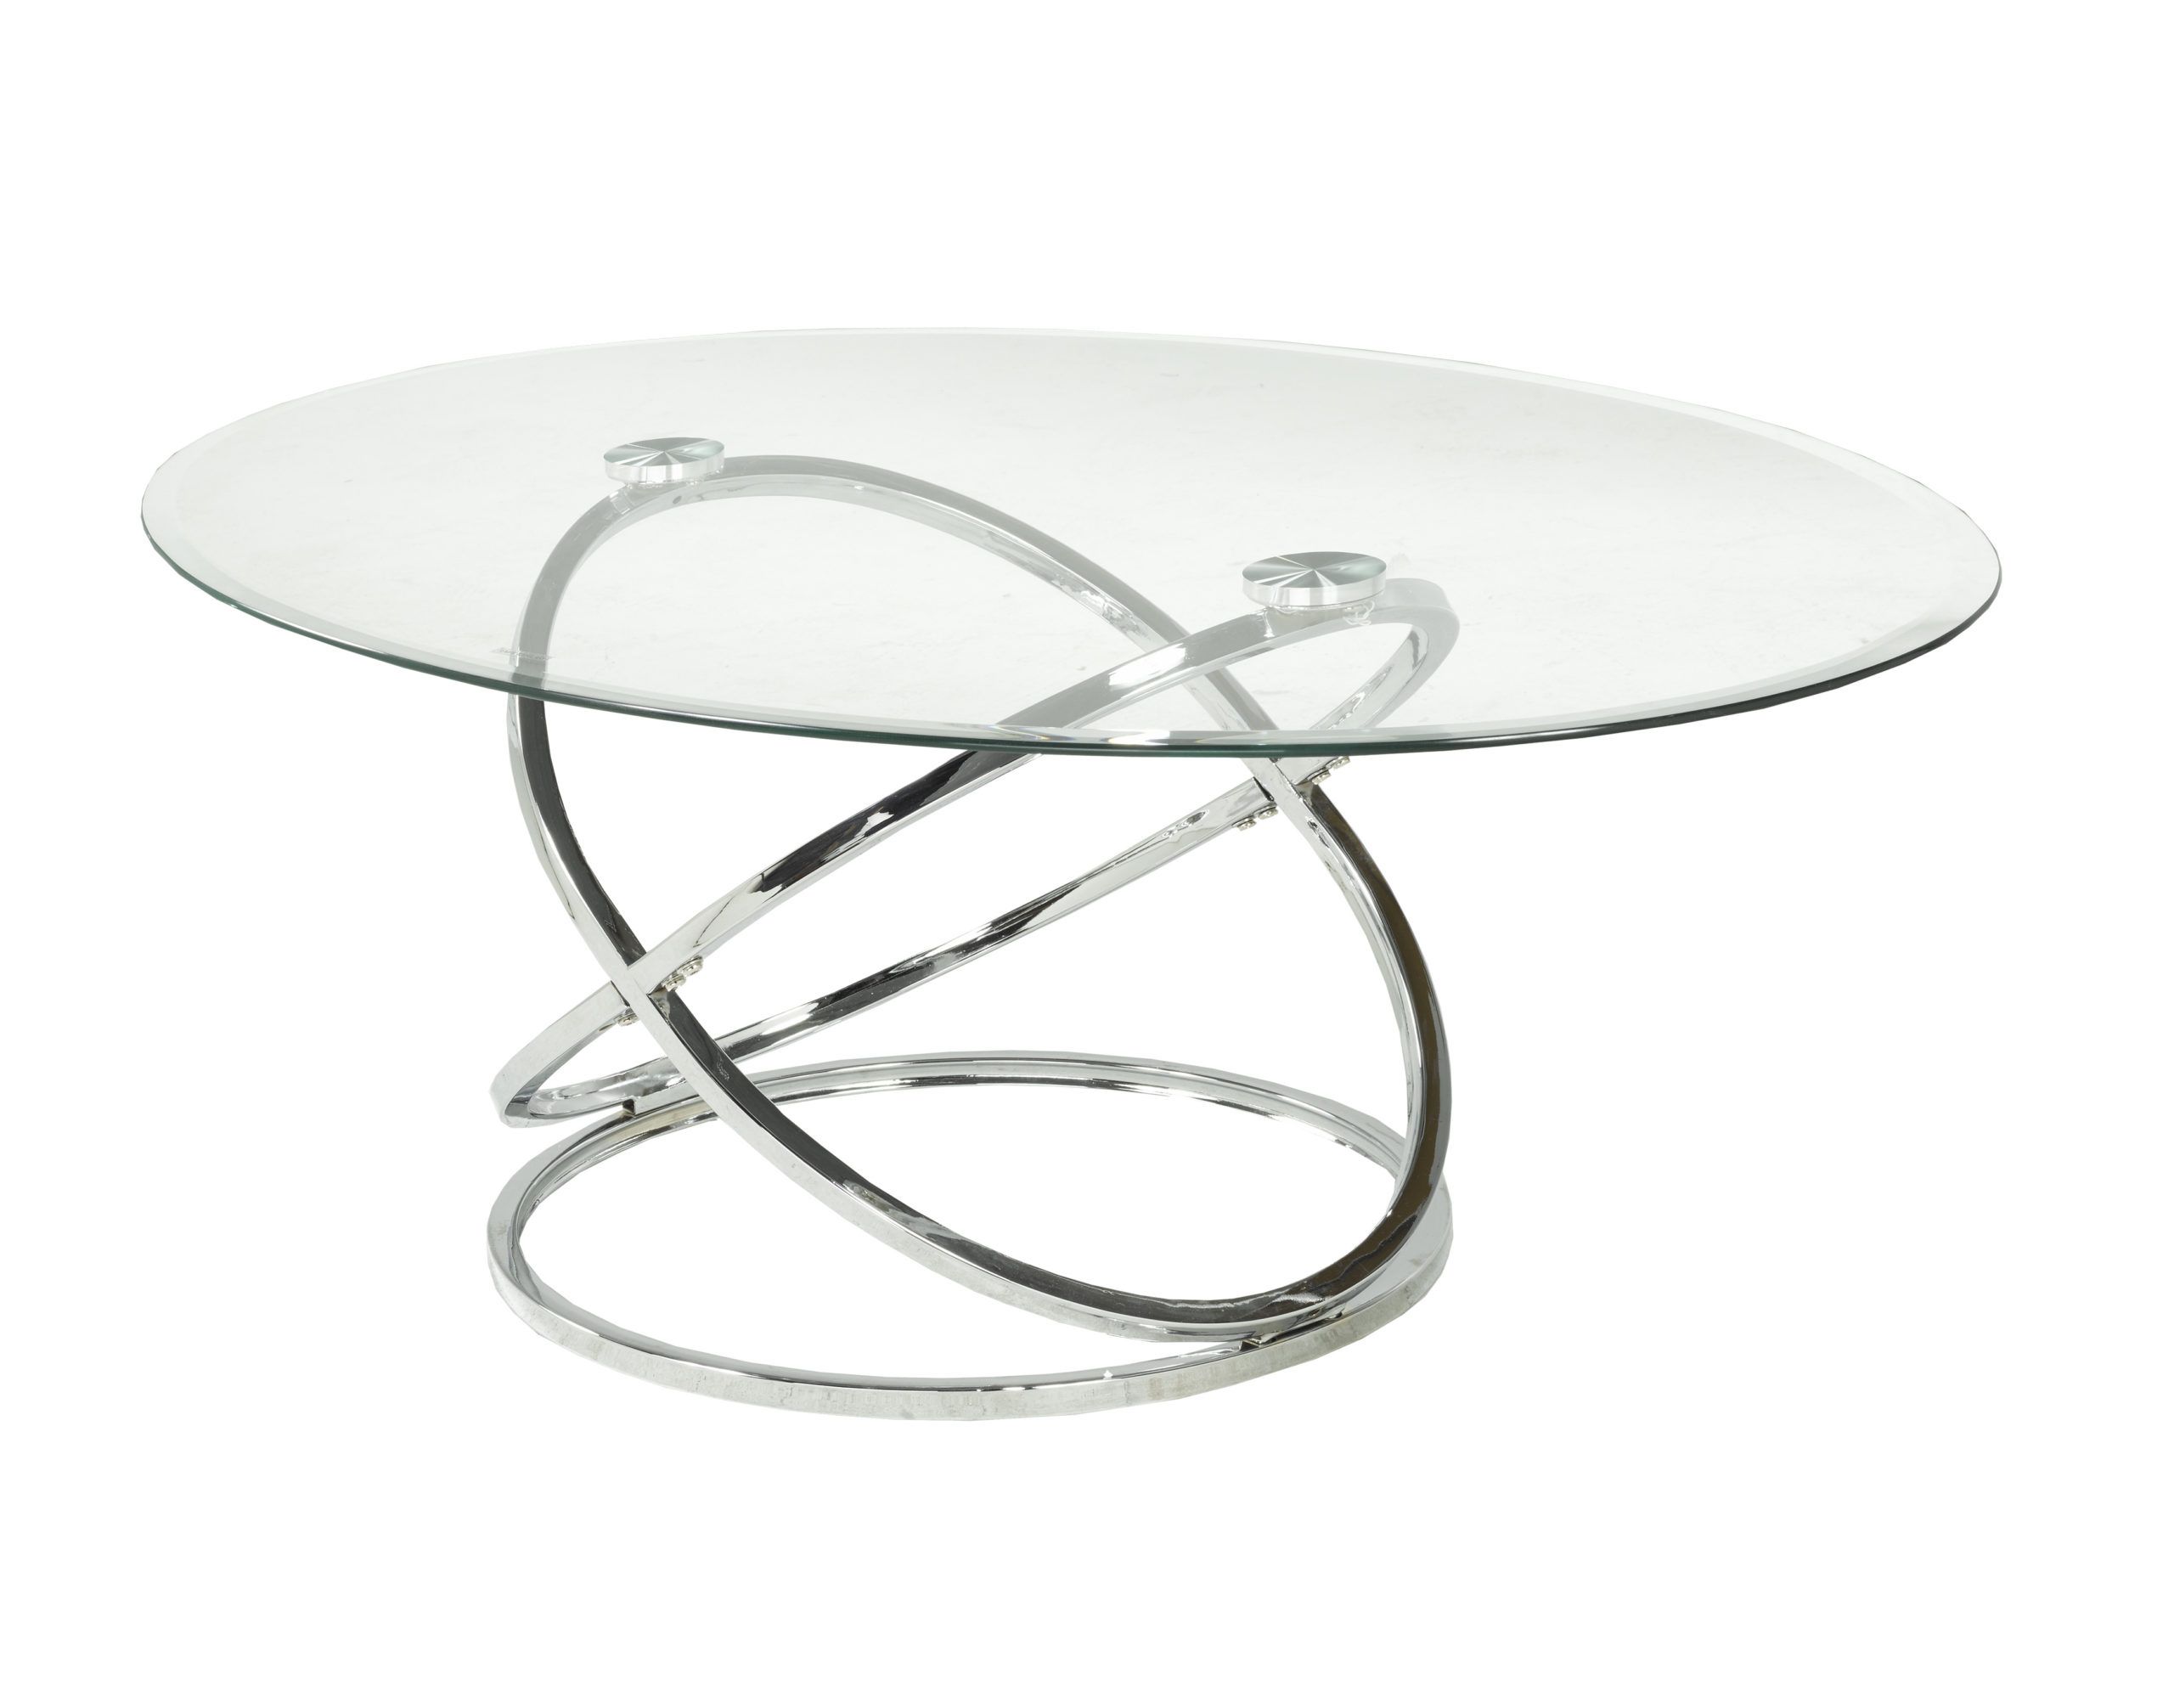 Modern Oval Glass And Chrome Occasional Tables – Arrow Furniture Intended For Glass Oval Coffee Tables (View 8 of 15)